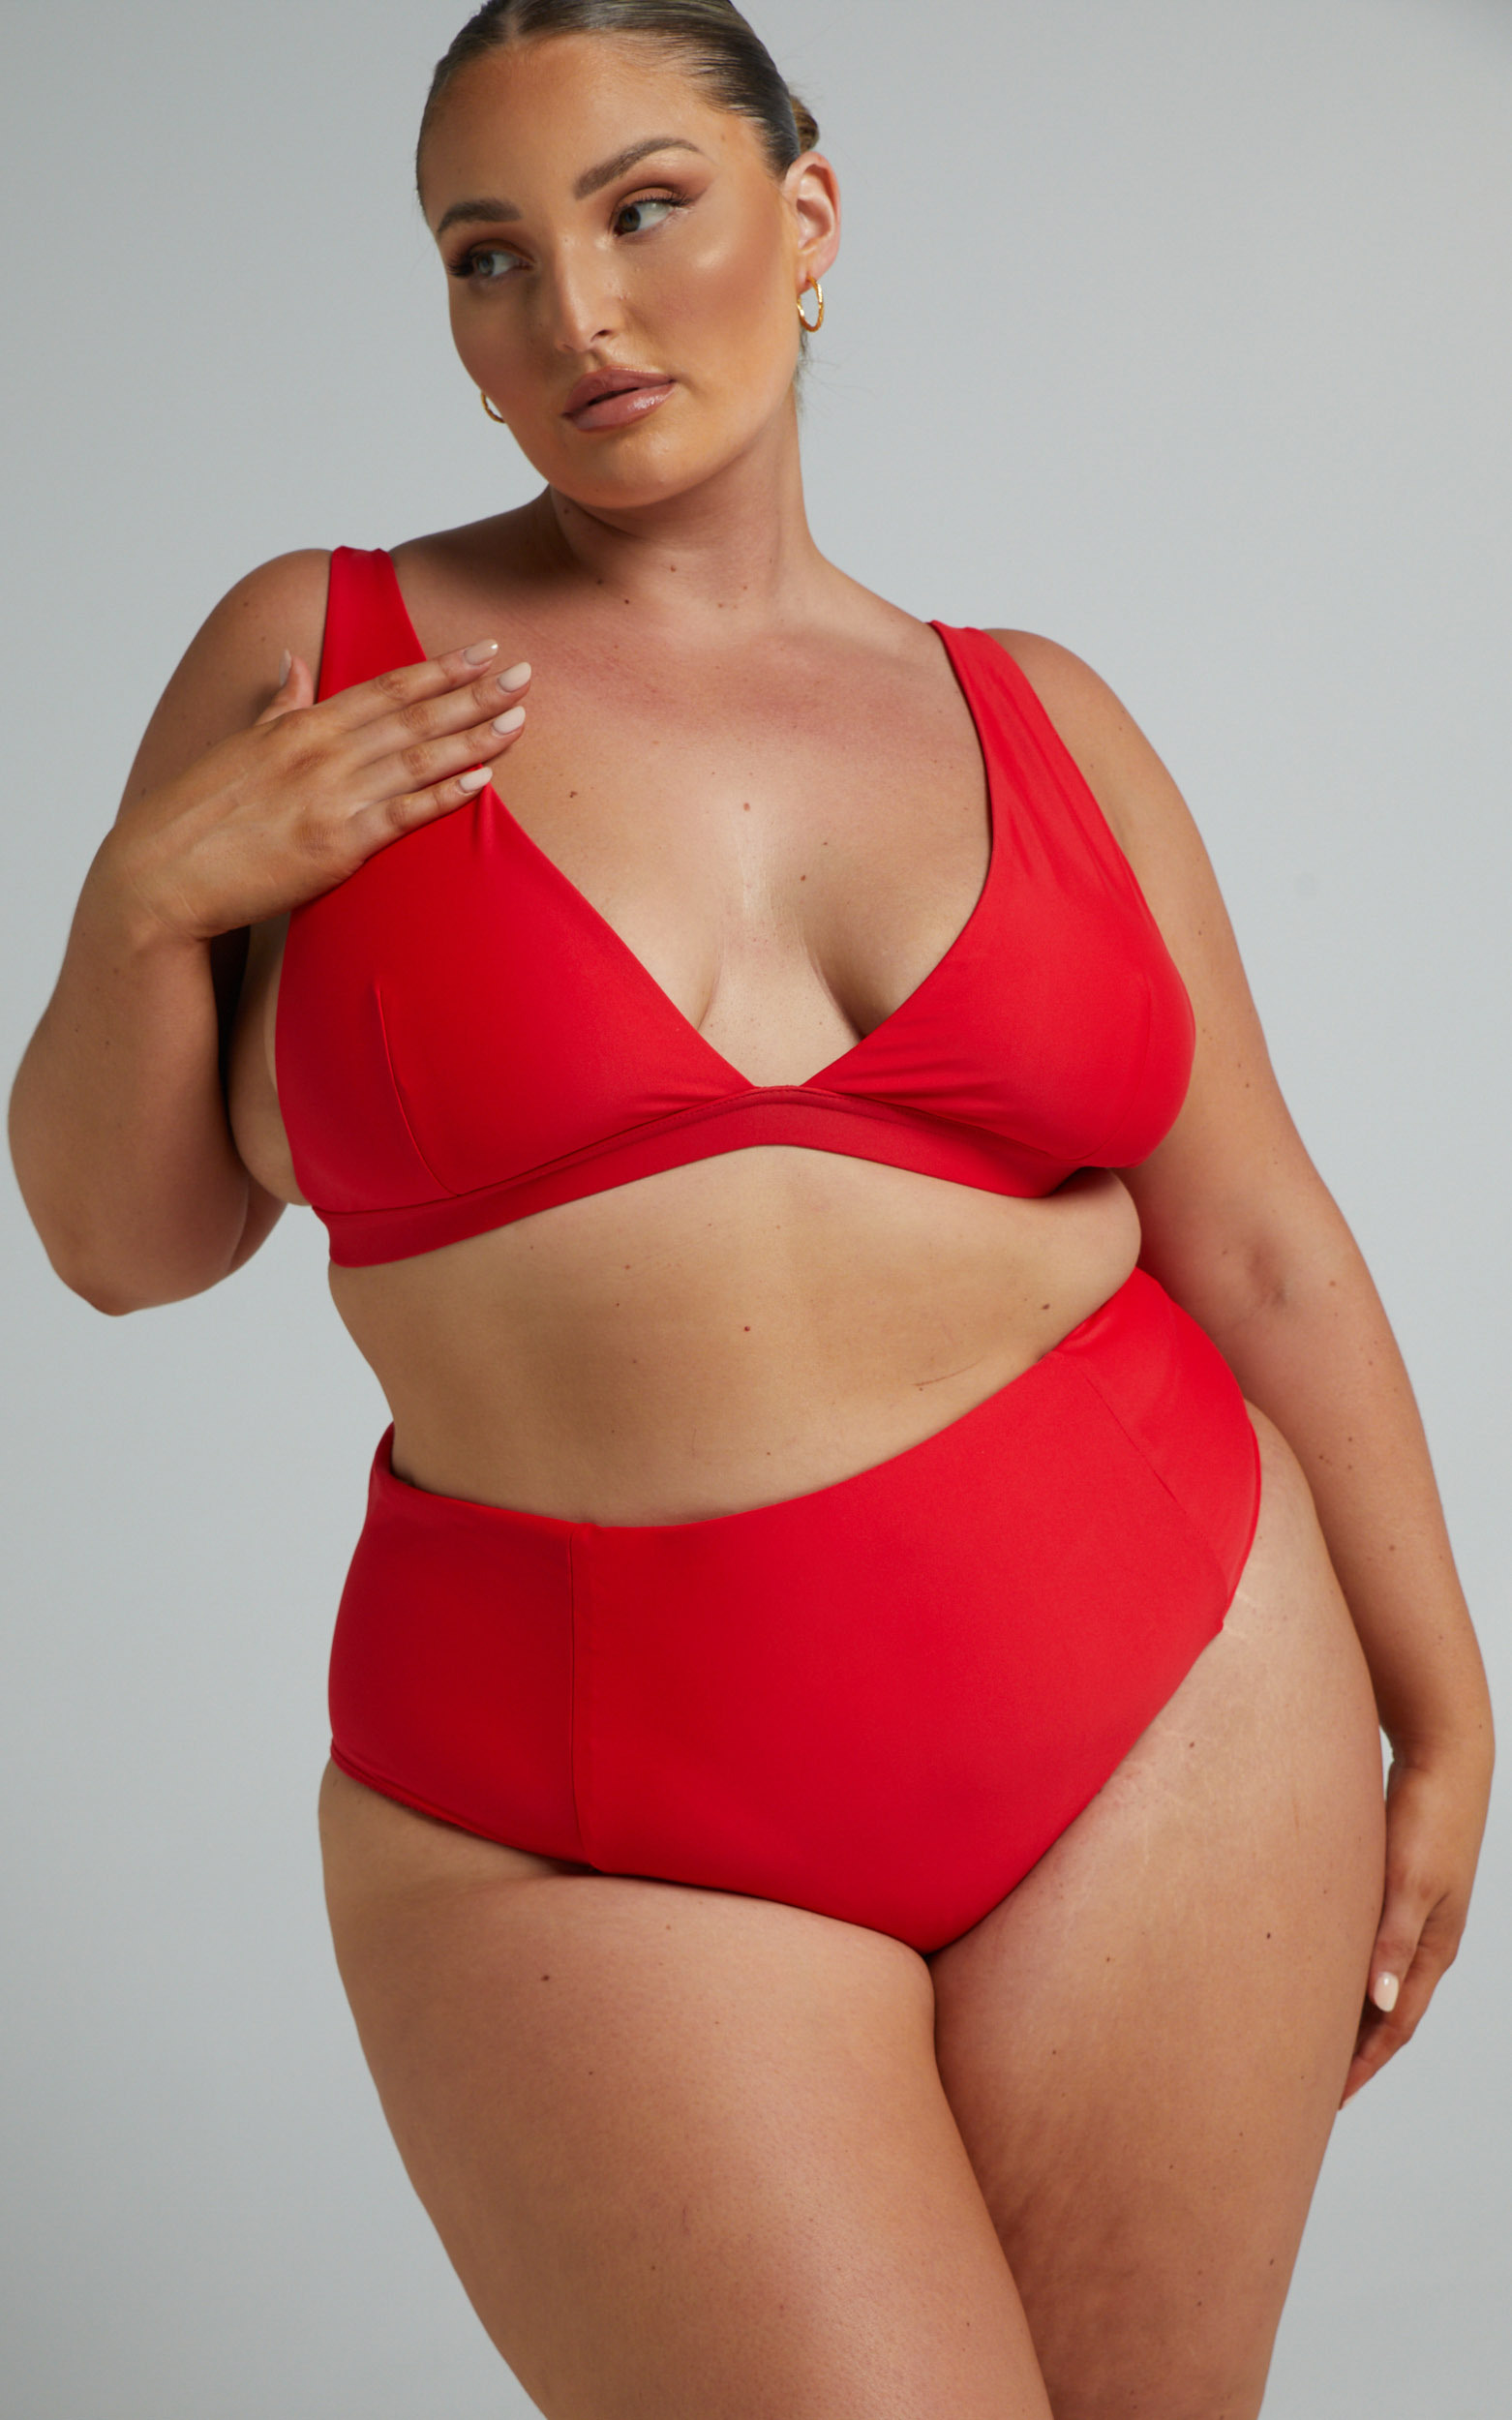 Nami High Waisted Bottom s in Recycled Nylon in Red - 04, RED1, hi-res image number null